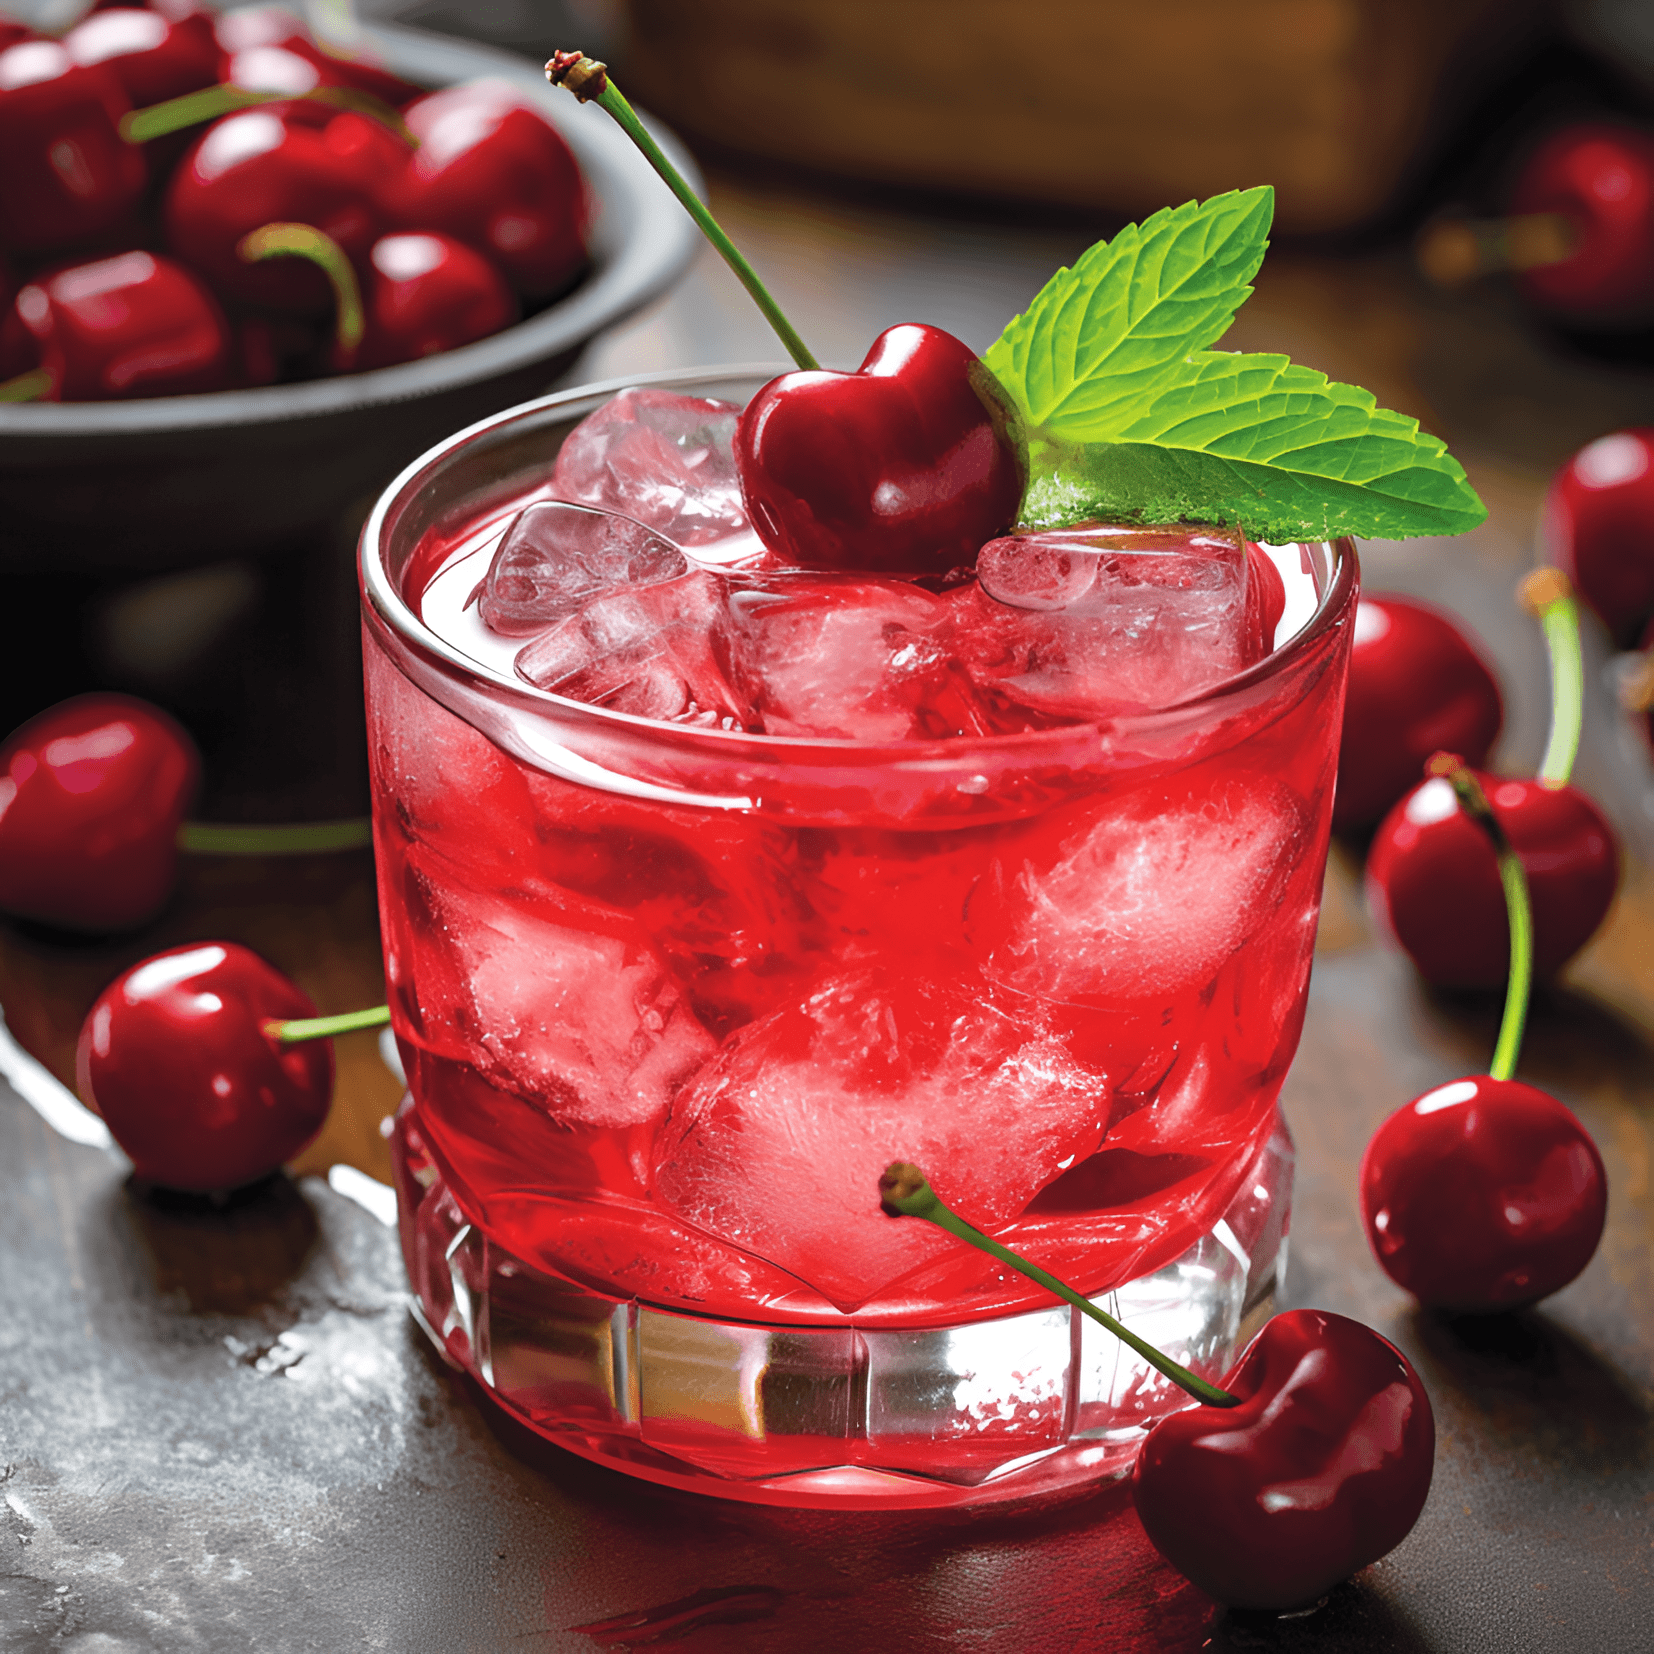 Cherry Cobbler Cocktail Recipe - The Cherry Cobbler cocktail is a delightful mix of sweet, tart, and fruity flavors. The combination of cherry brandy, fresh cherries, and lemon juice creates a refreshing and tangy taste, while the sugar and crushed ice add a touch of sweetness and a smooth texture.